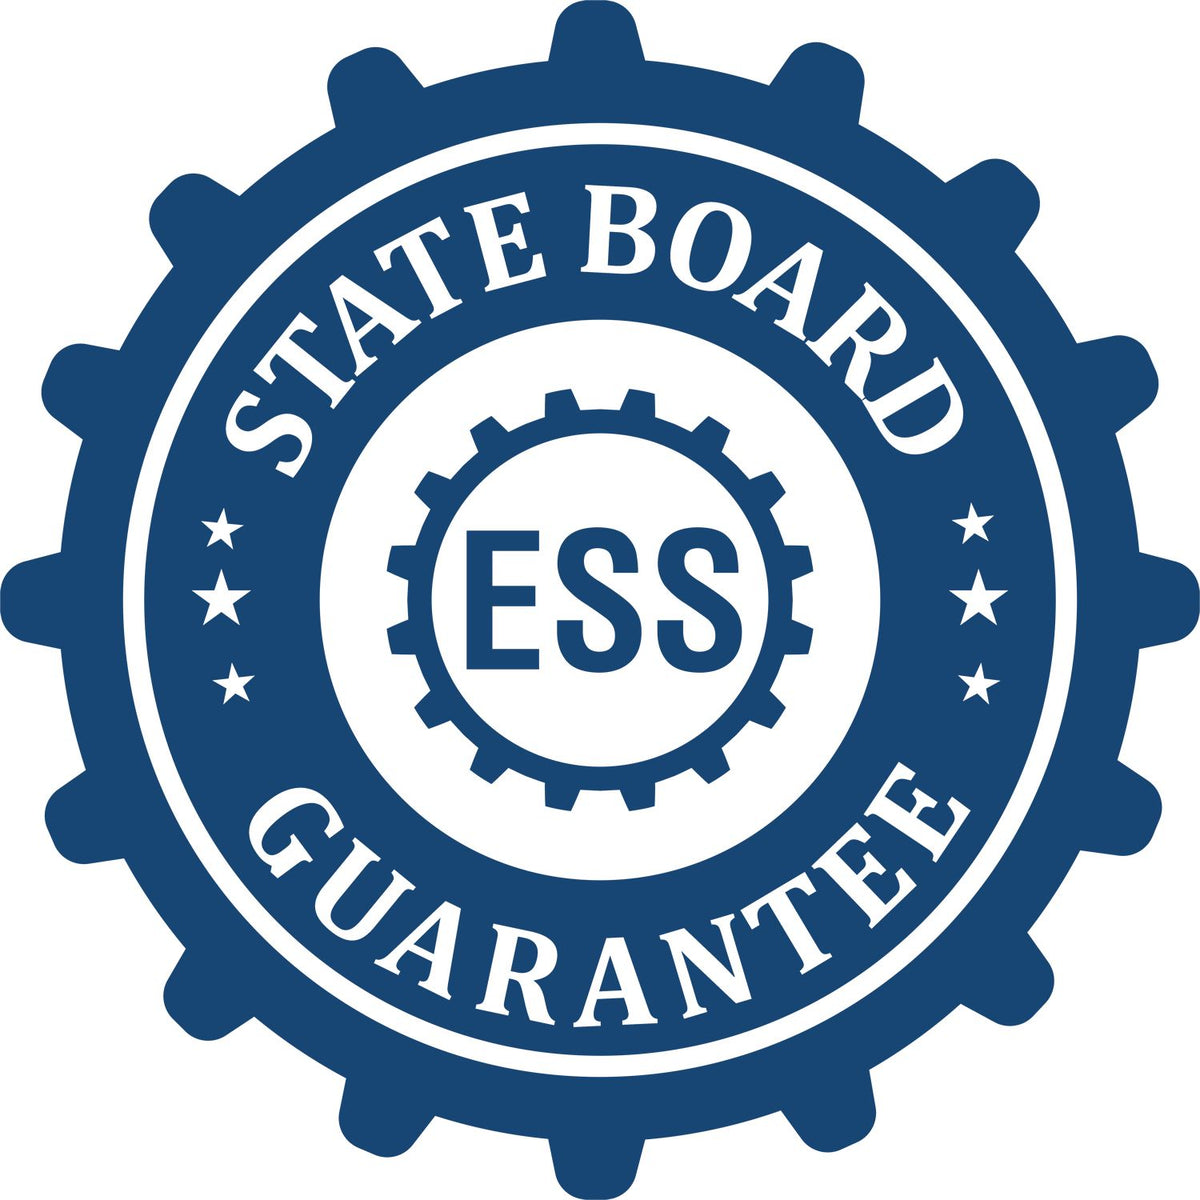 An emblem in a gear shape illustrating a state board guarantee for the Guam Engineer Desk Seal product.